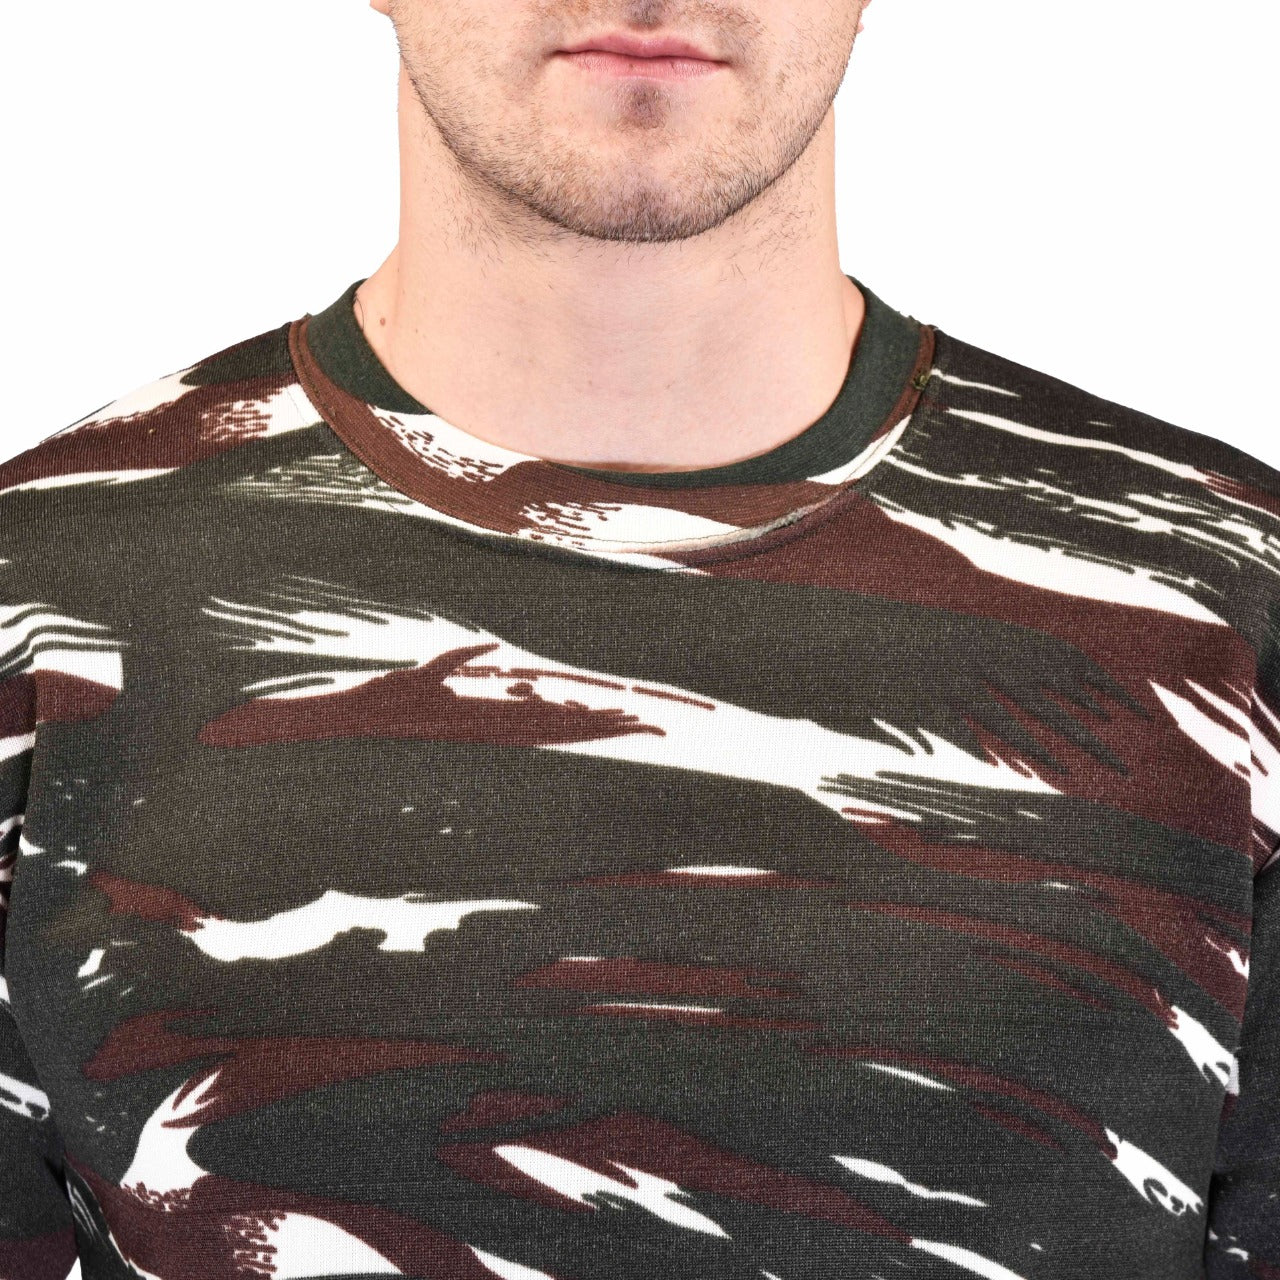 CRPF Camouflage Round Neck Full Sleeve Unisex Winter Sweat Shirt Army Military Defence